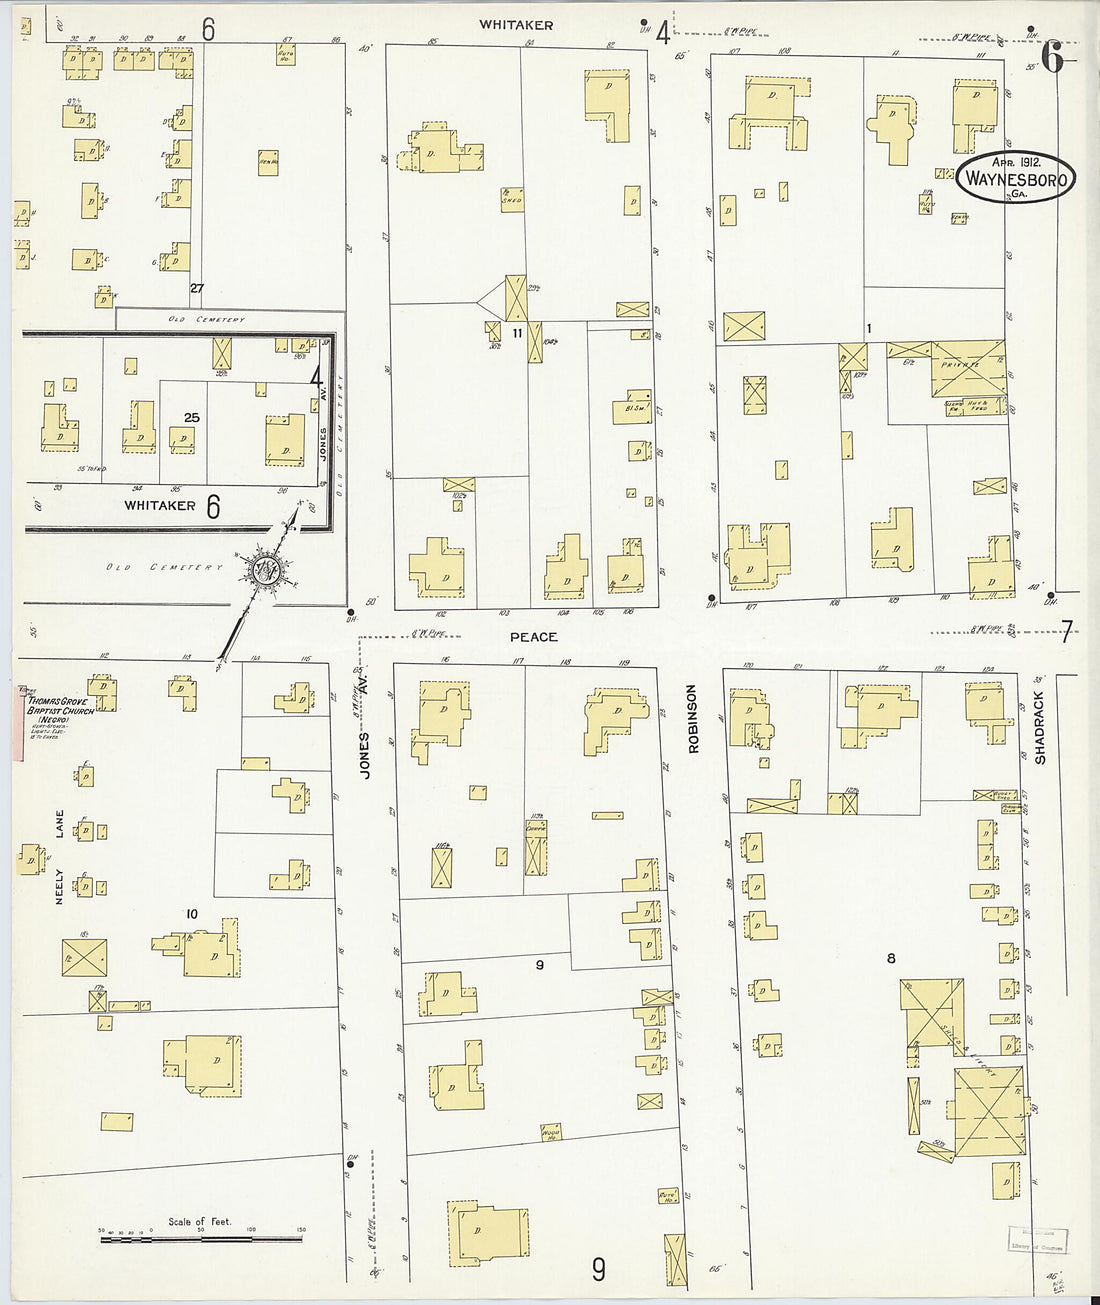 This old map of Waynesboro, Burke County, Georgia was created by Sanborn Map Company in 1912